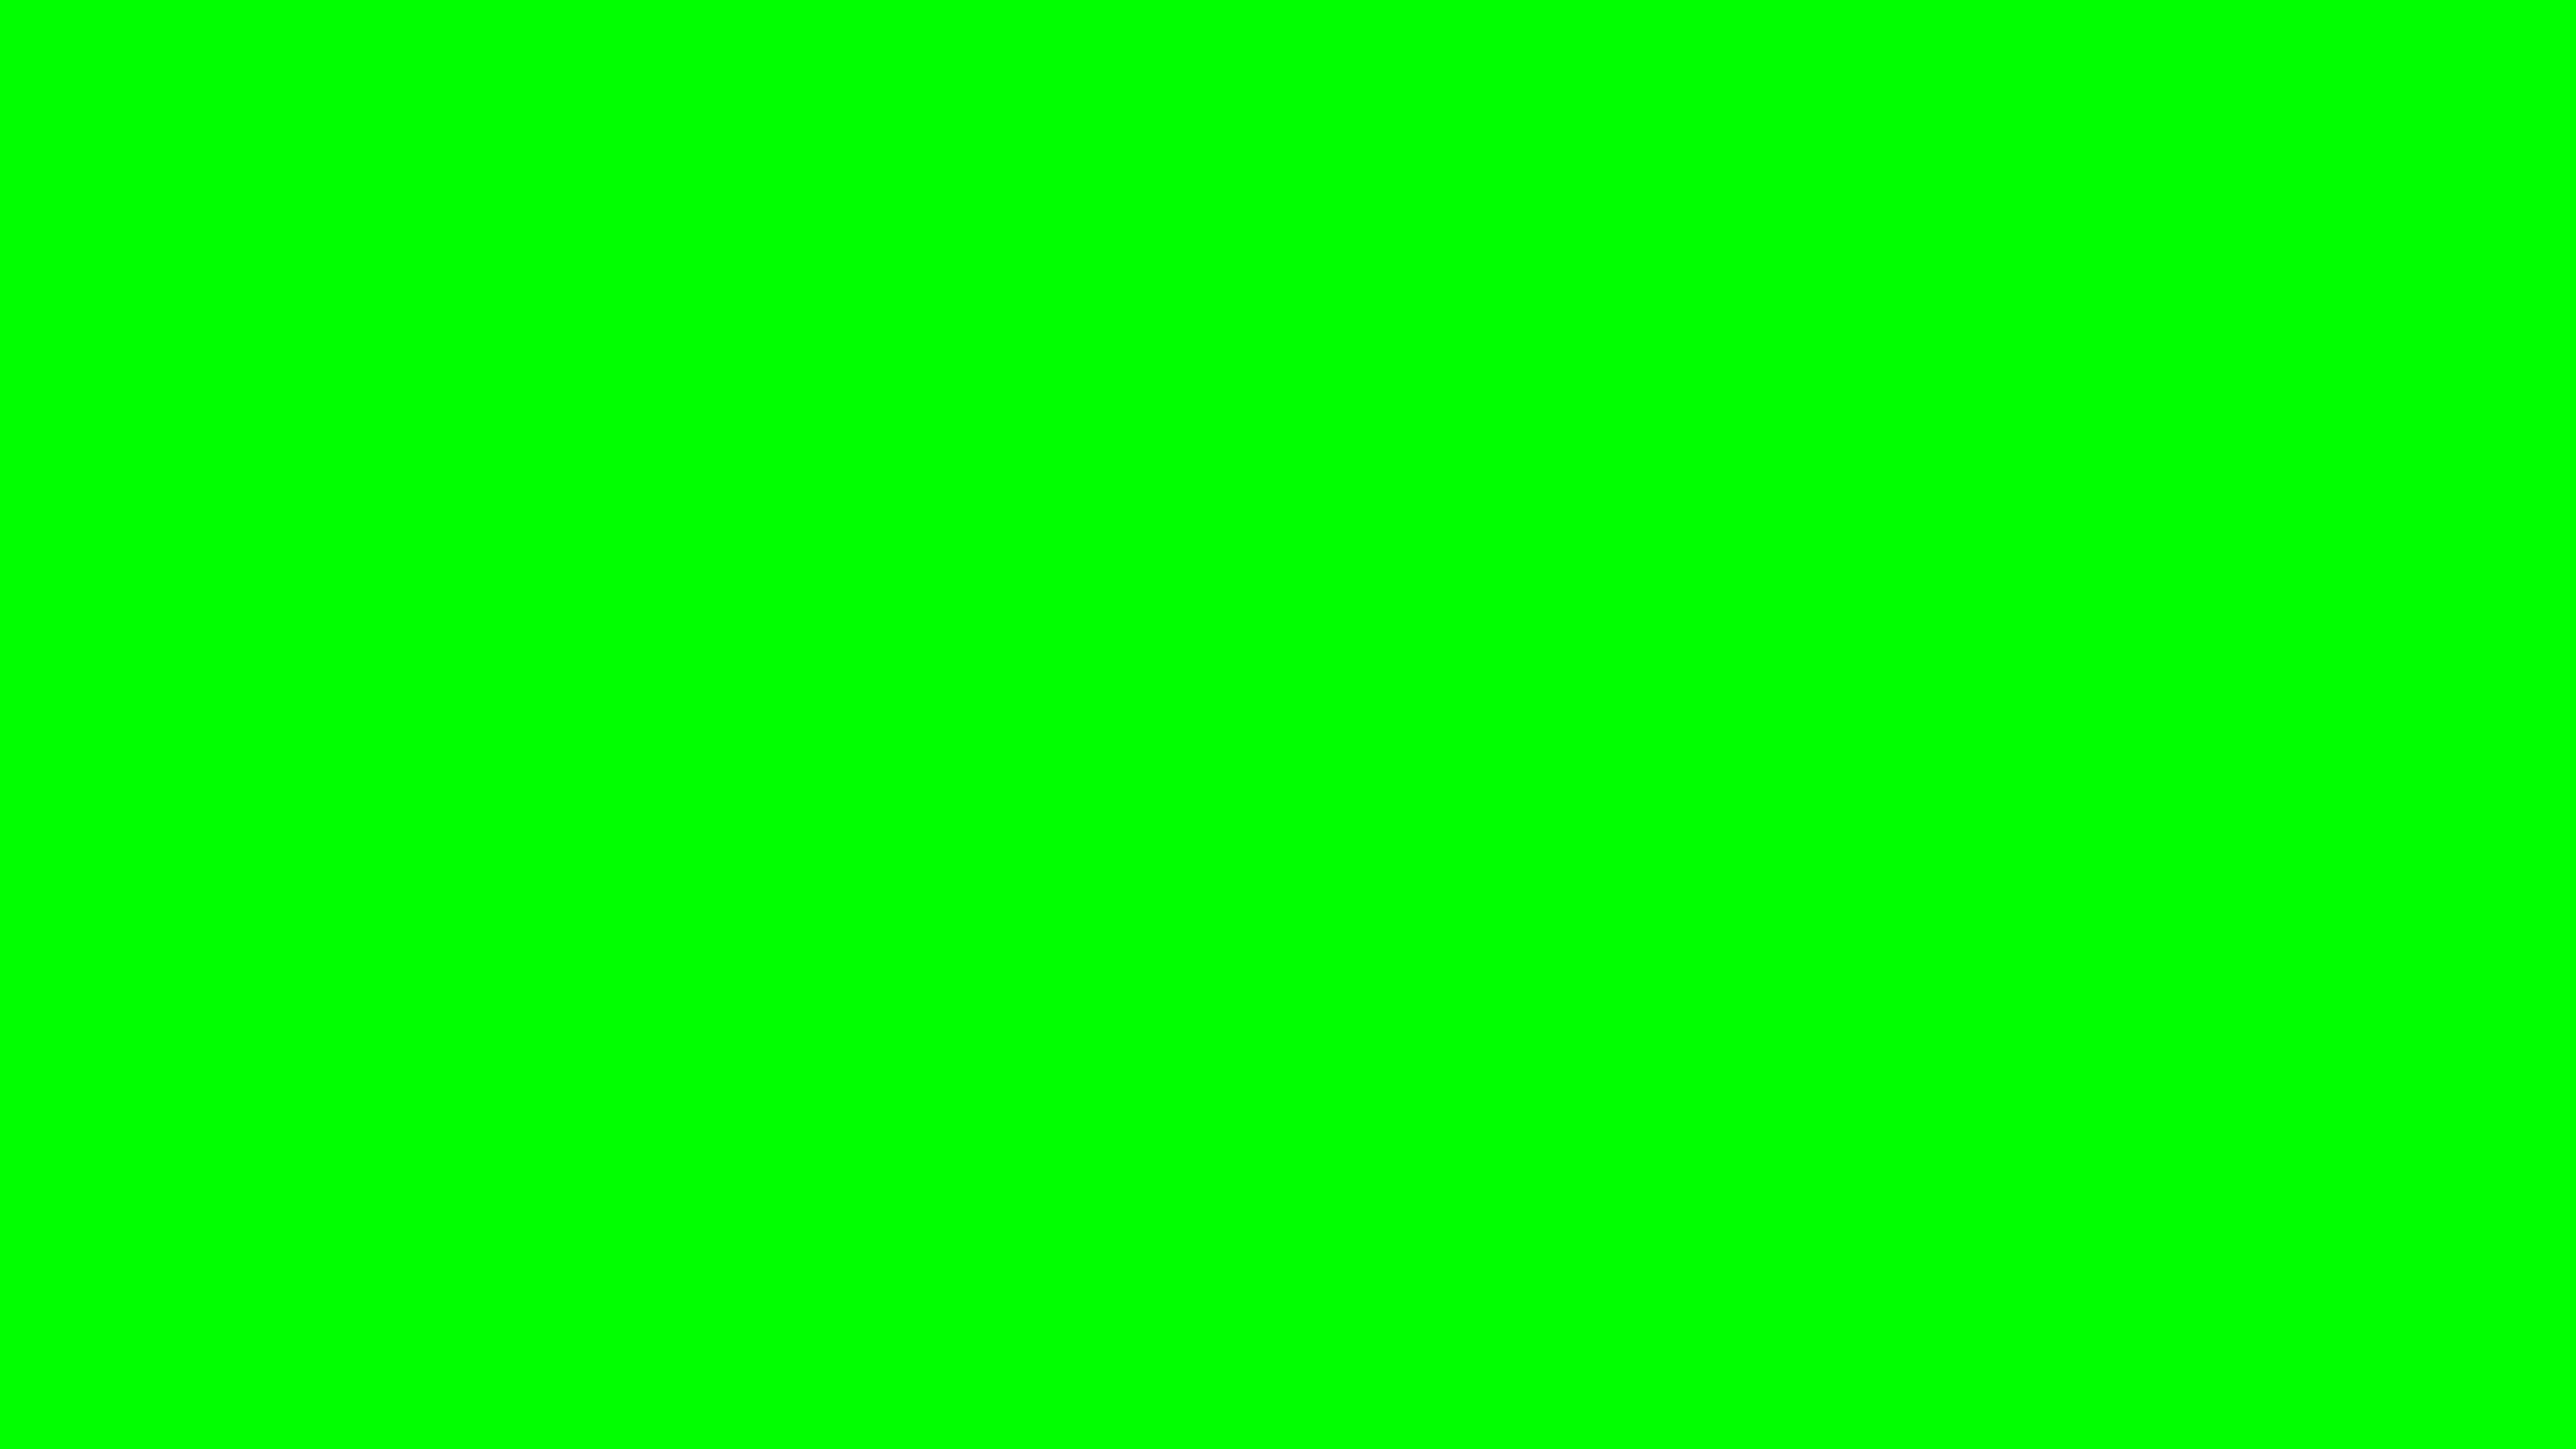 4096x2304 Lime Web Green Solid Color Background